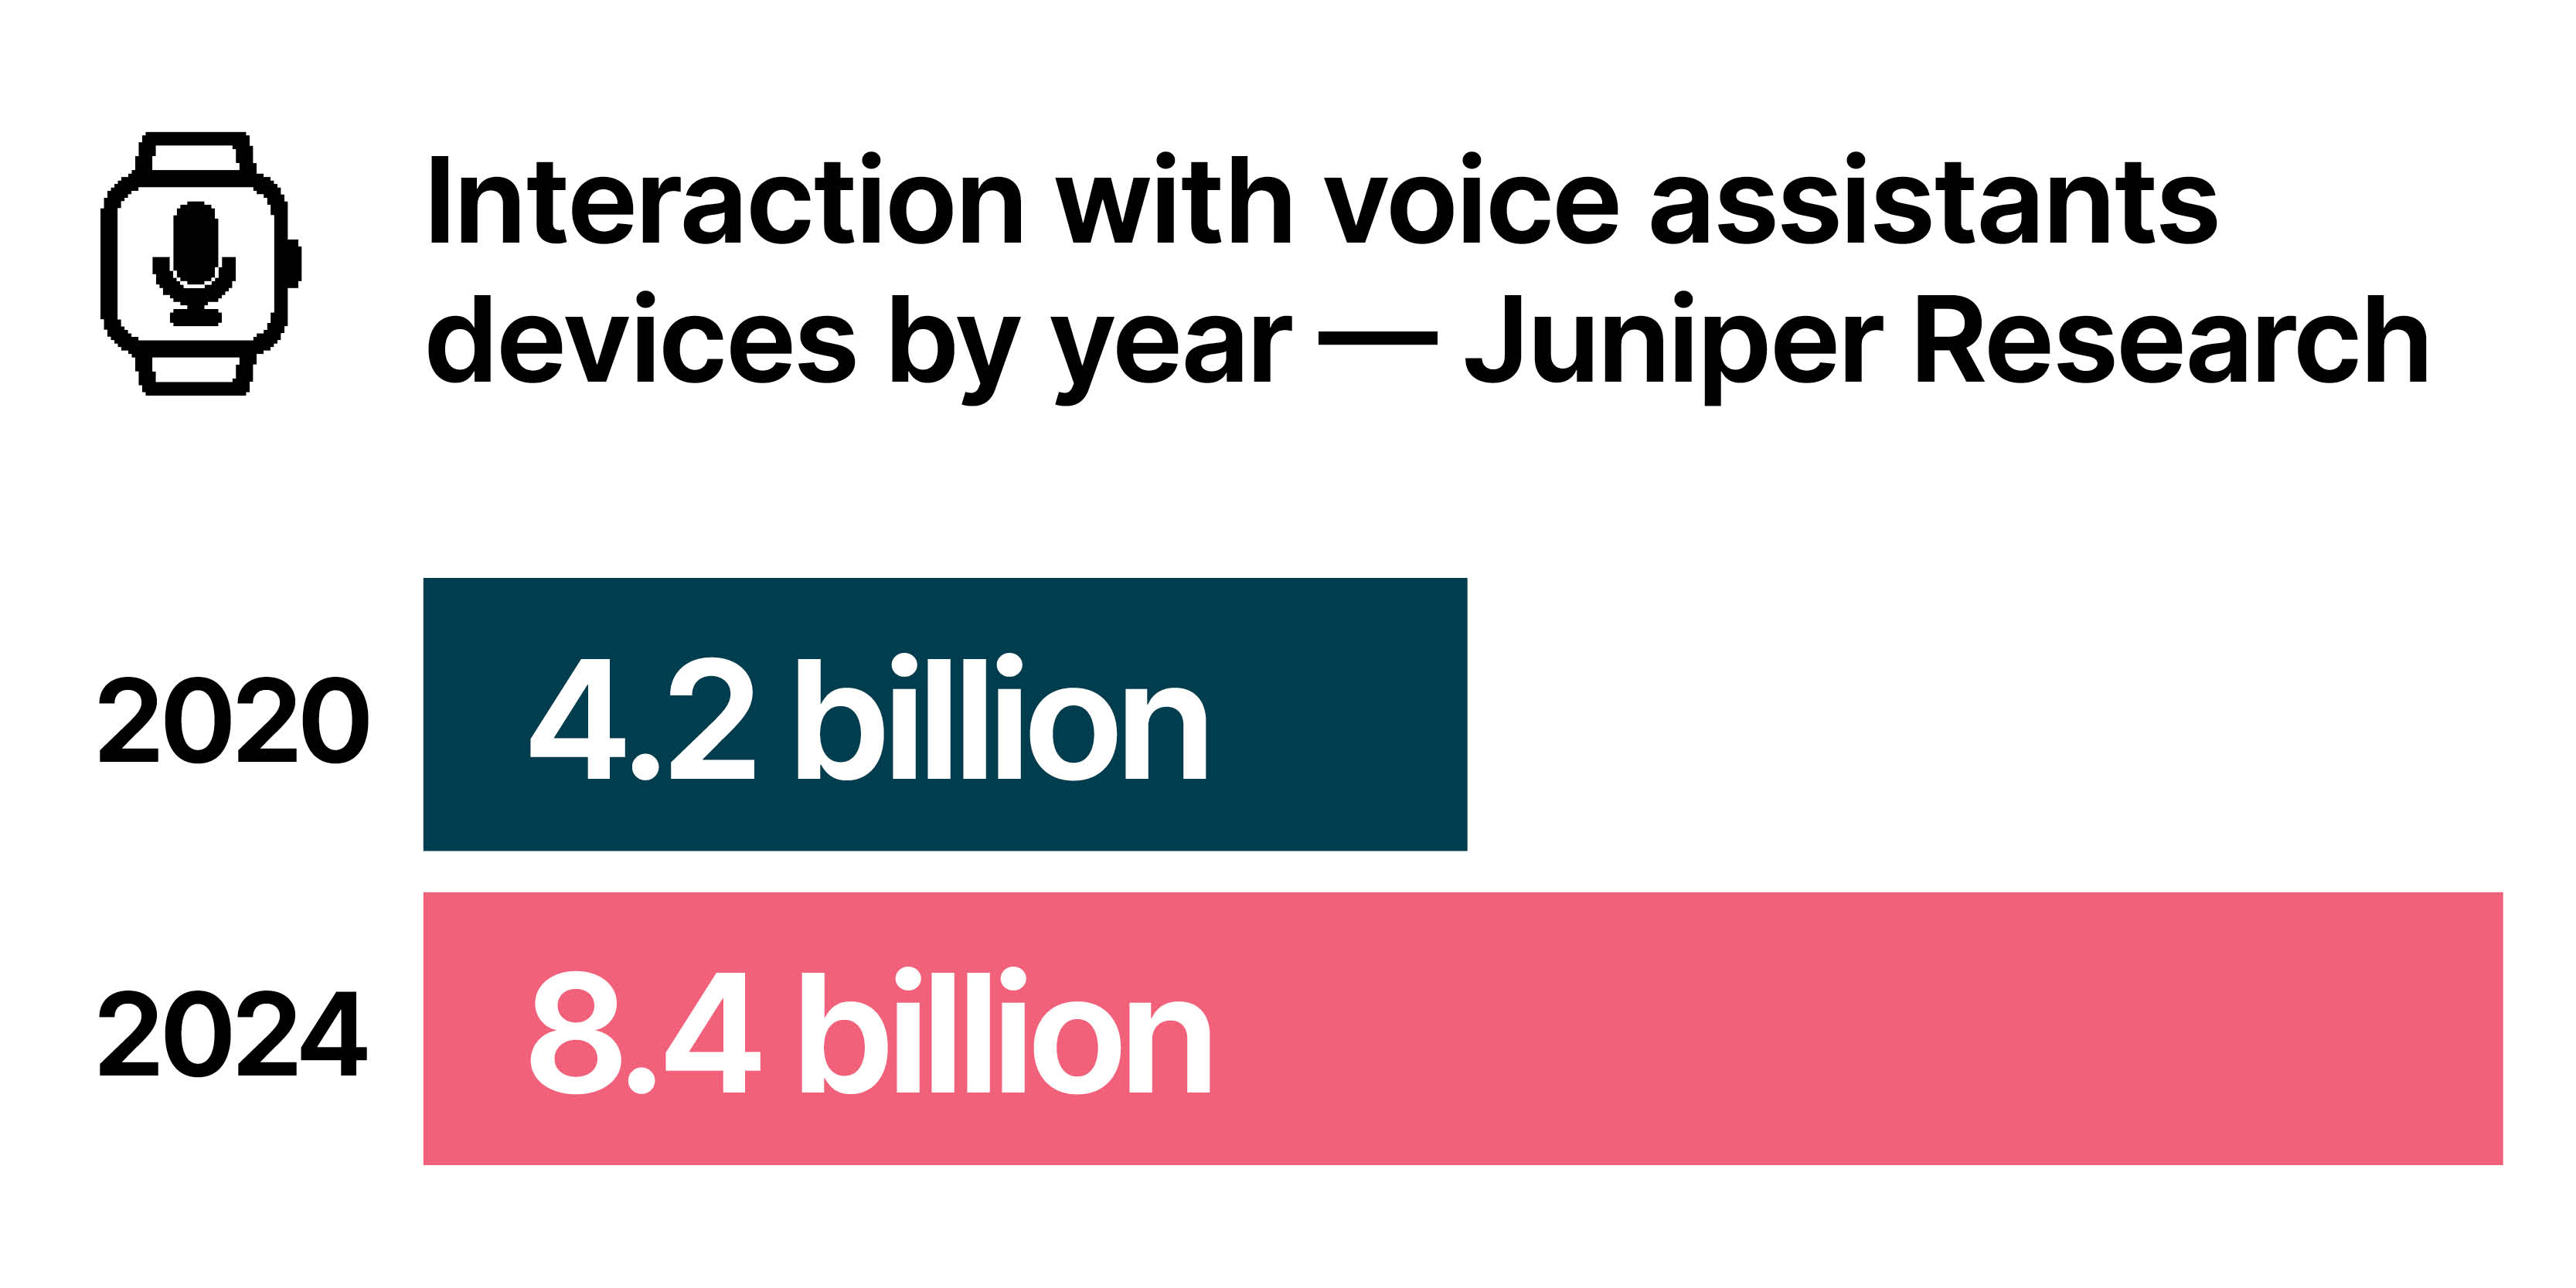 Interaction with voice assistants devices by year - Juniper Research. The graph shows that in 2020 there were 4.2 billion interactions and in 2024 there were 8.4 billion interactions.